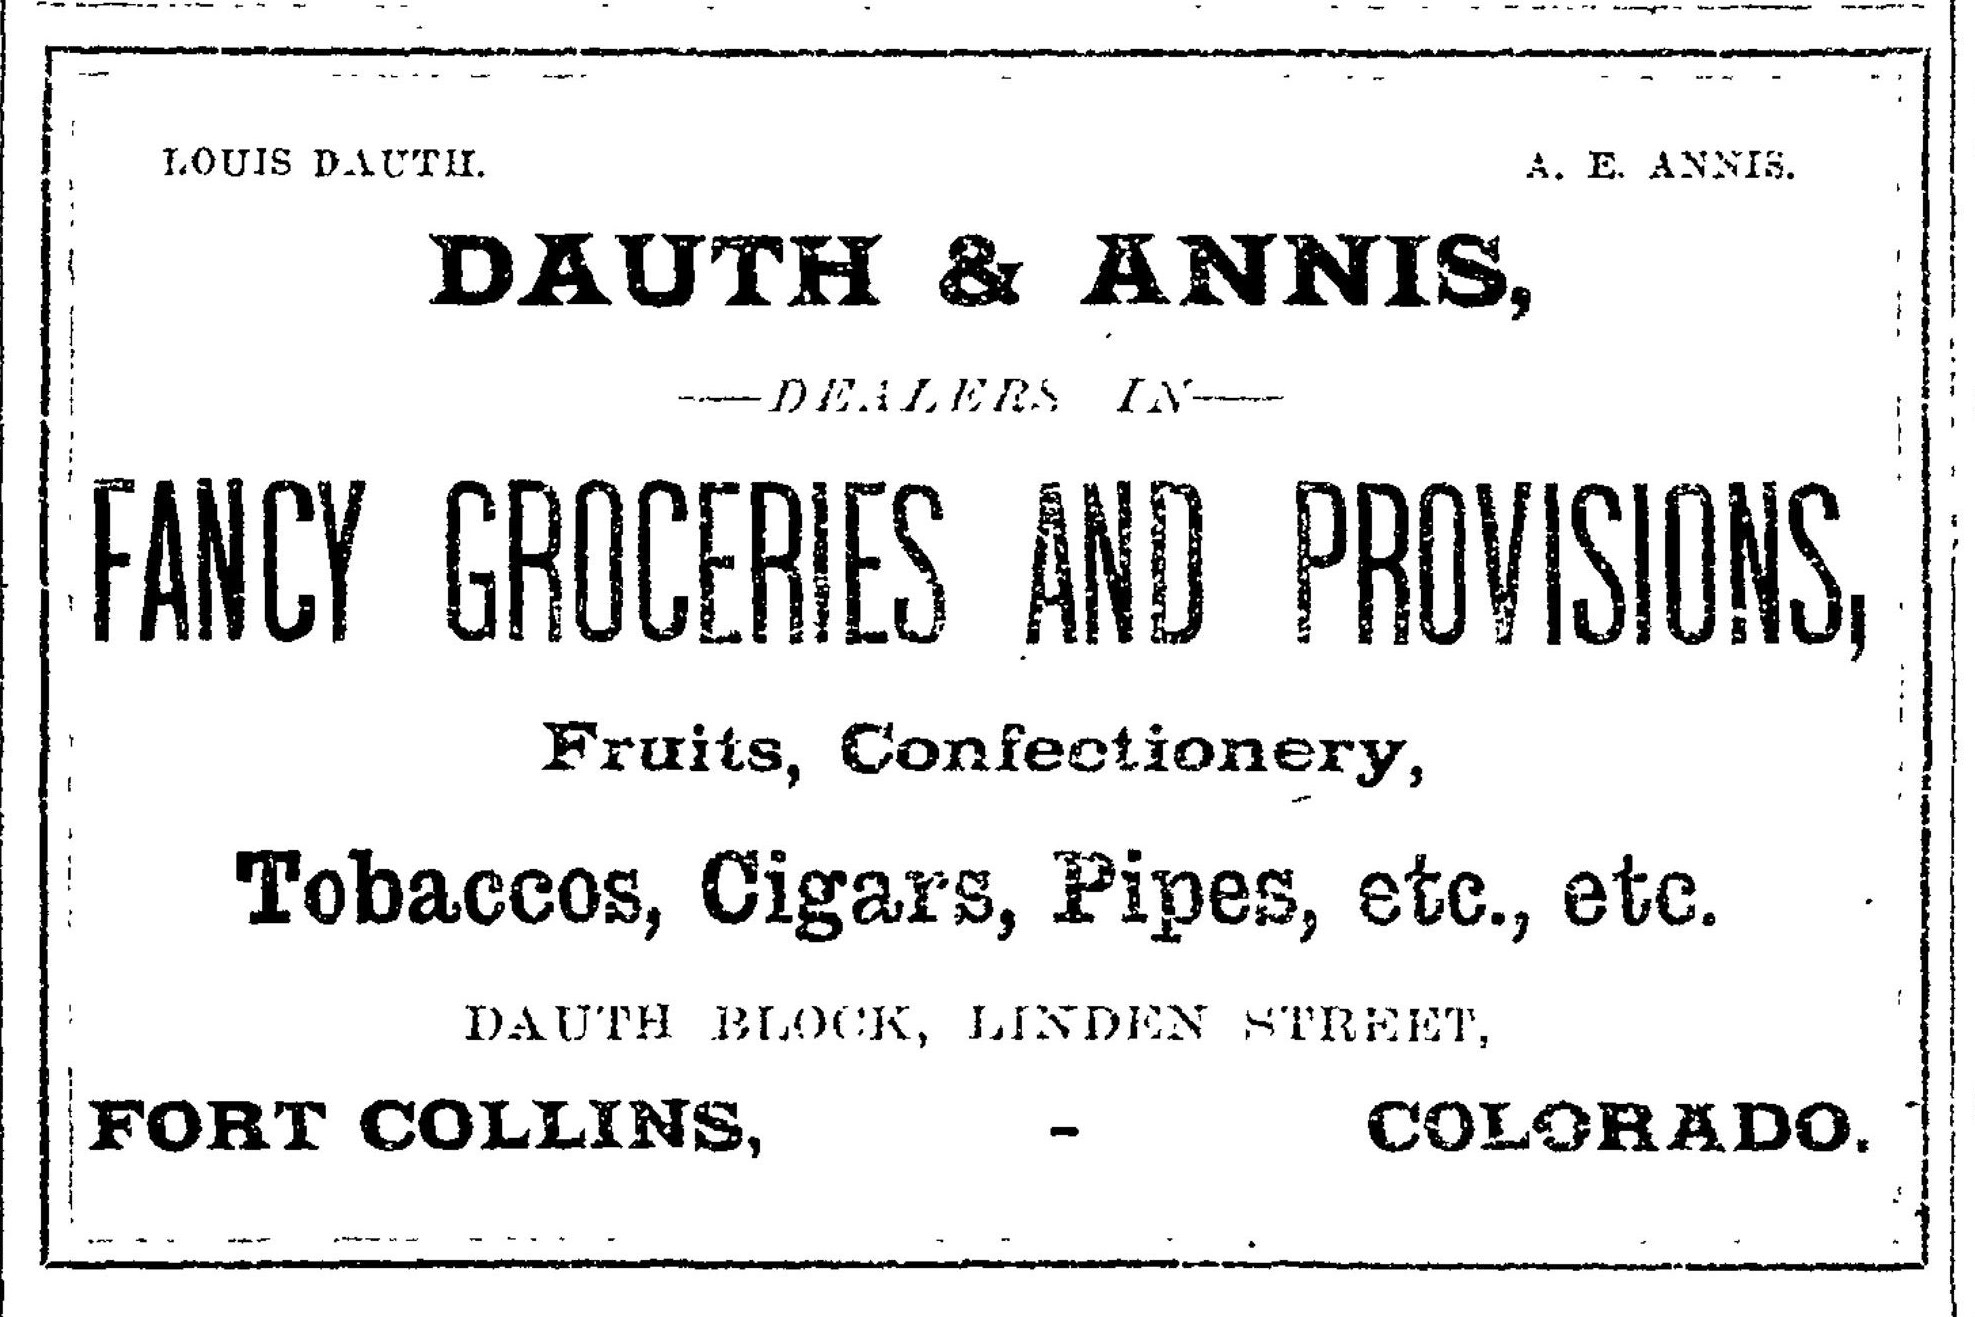 Dauth Family Archive - 1883-06-28 - Fort Collins Courier - Louis Dauth First Dauth & Annis Advertisement